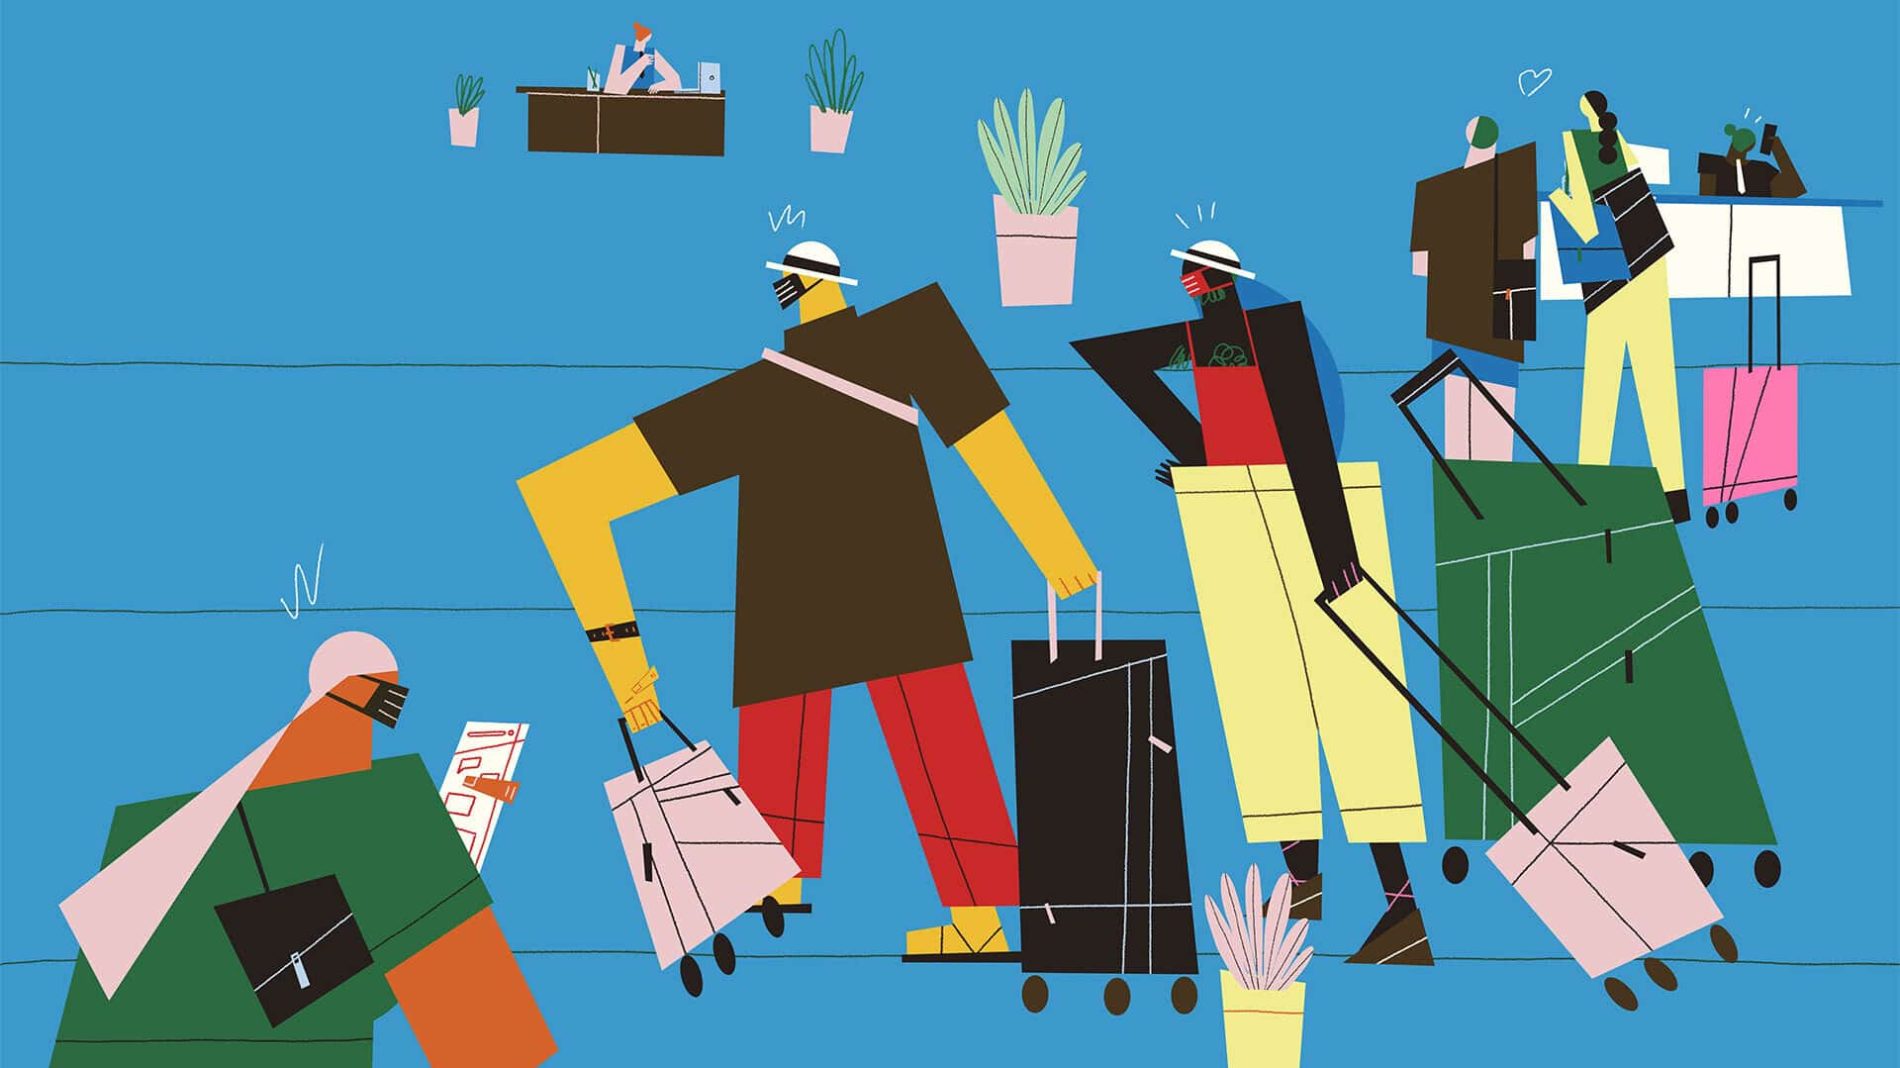 Illustration of people wearing masks waiting in an airport with suitcases